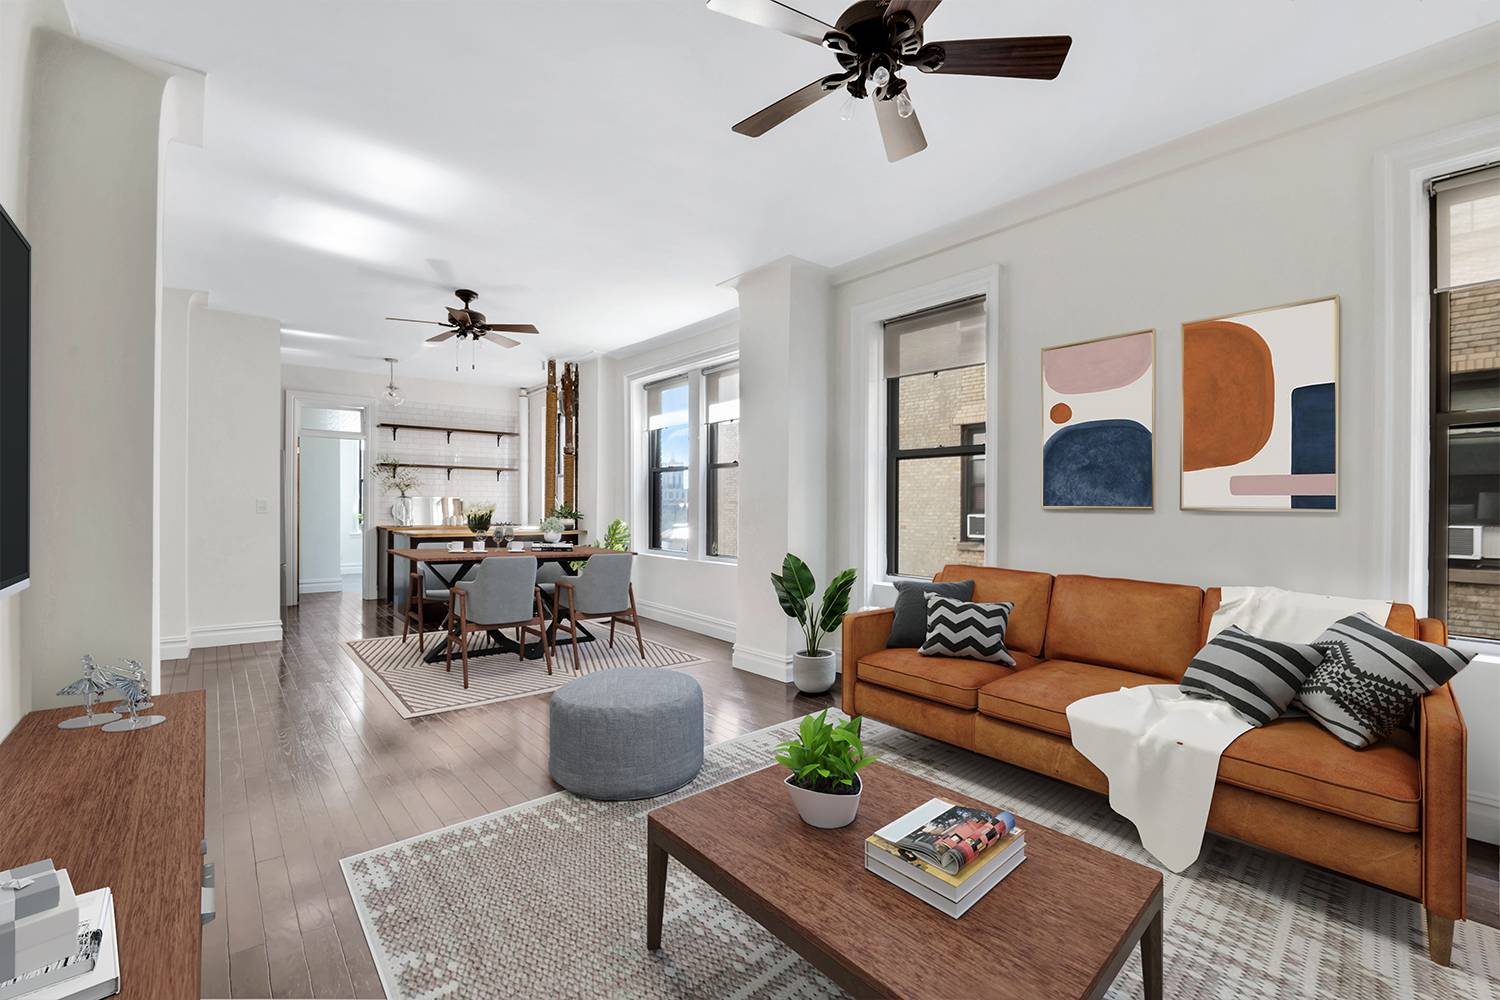 PRICE IMPROVED Artfully designed and renovated, this 2 Bed 1 Bath home offers high ceilings and an open living space featuring a charming and functional kitchen.